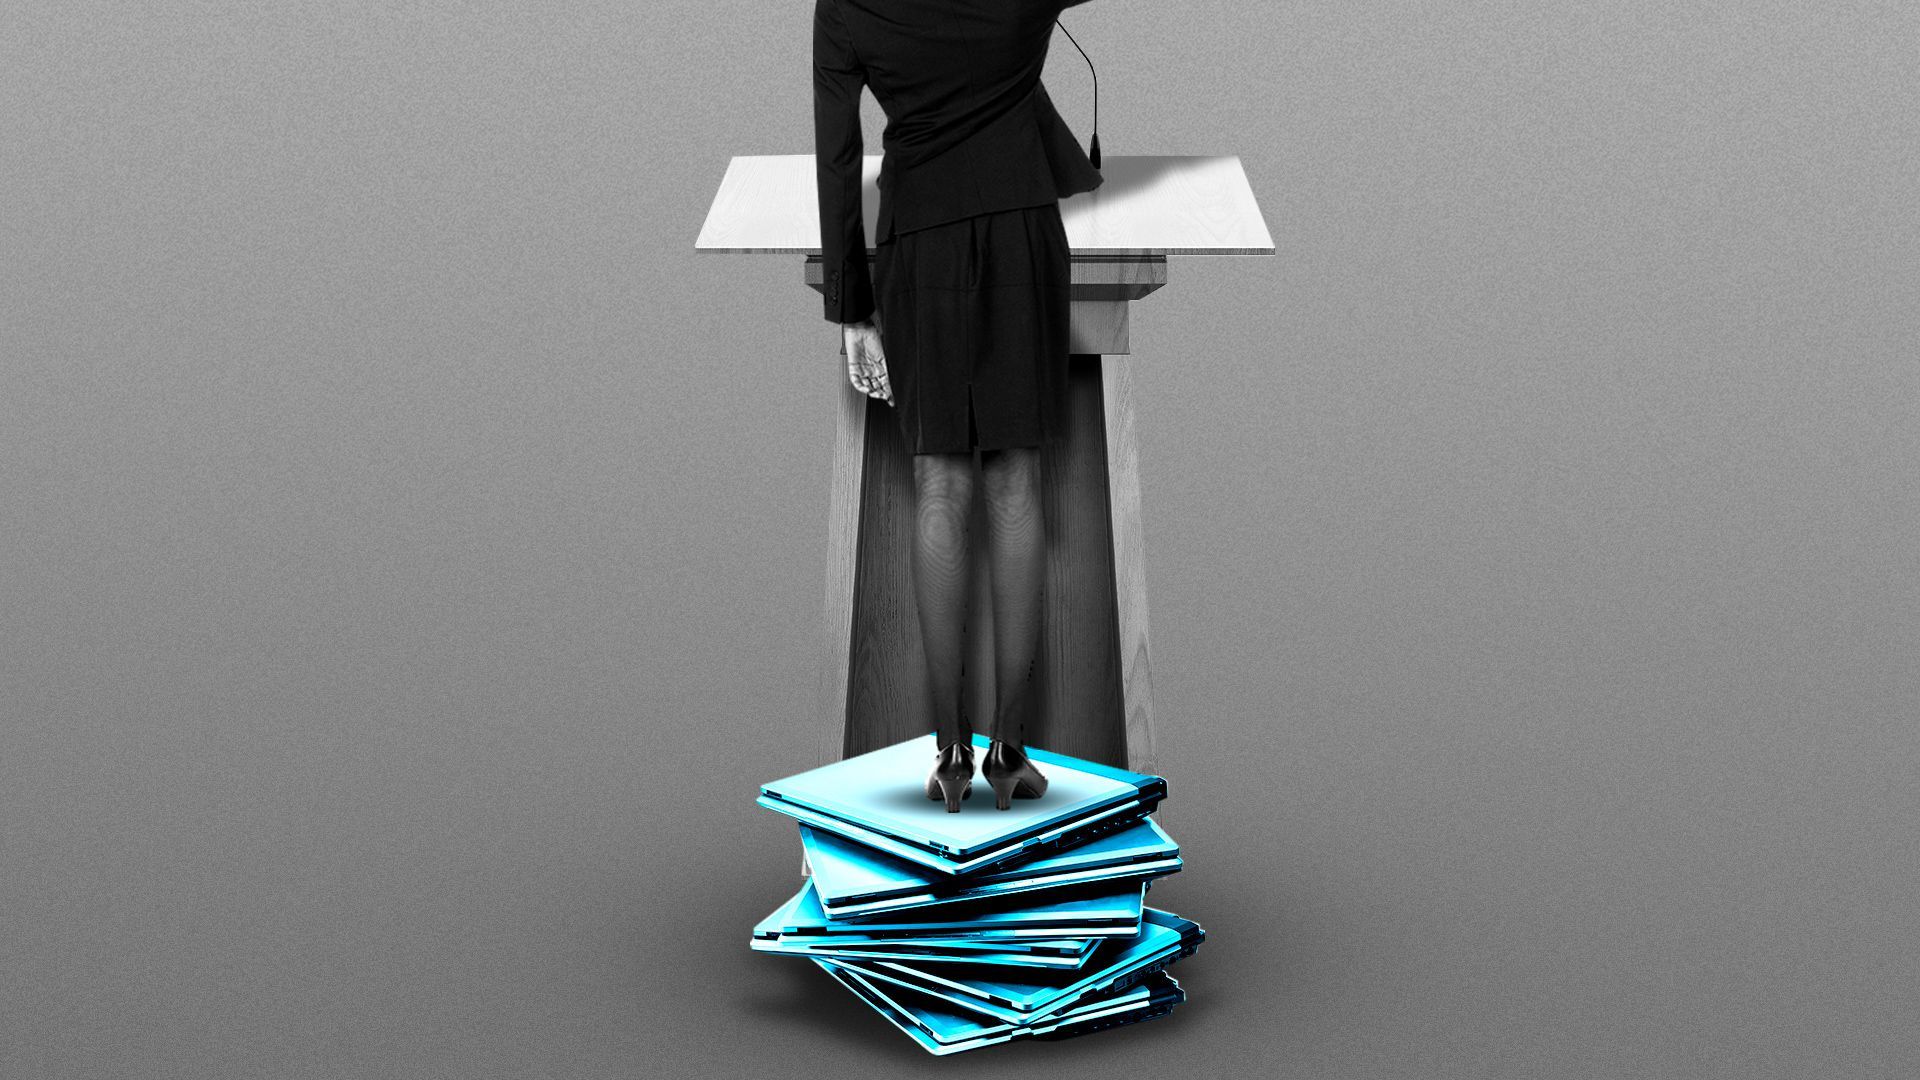 Illustration of a woman at a podium standing on a stack of laptops.  